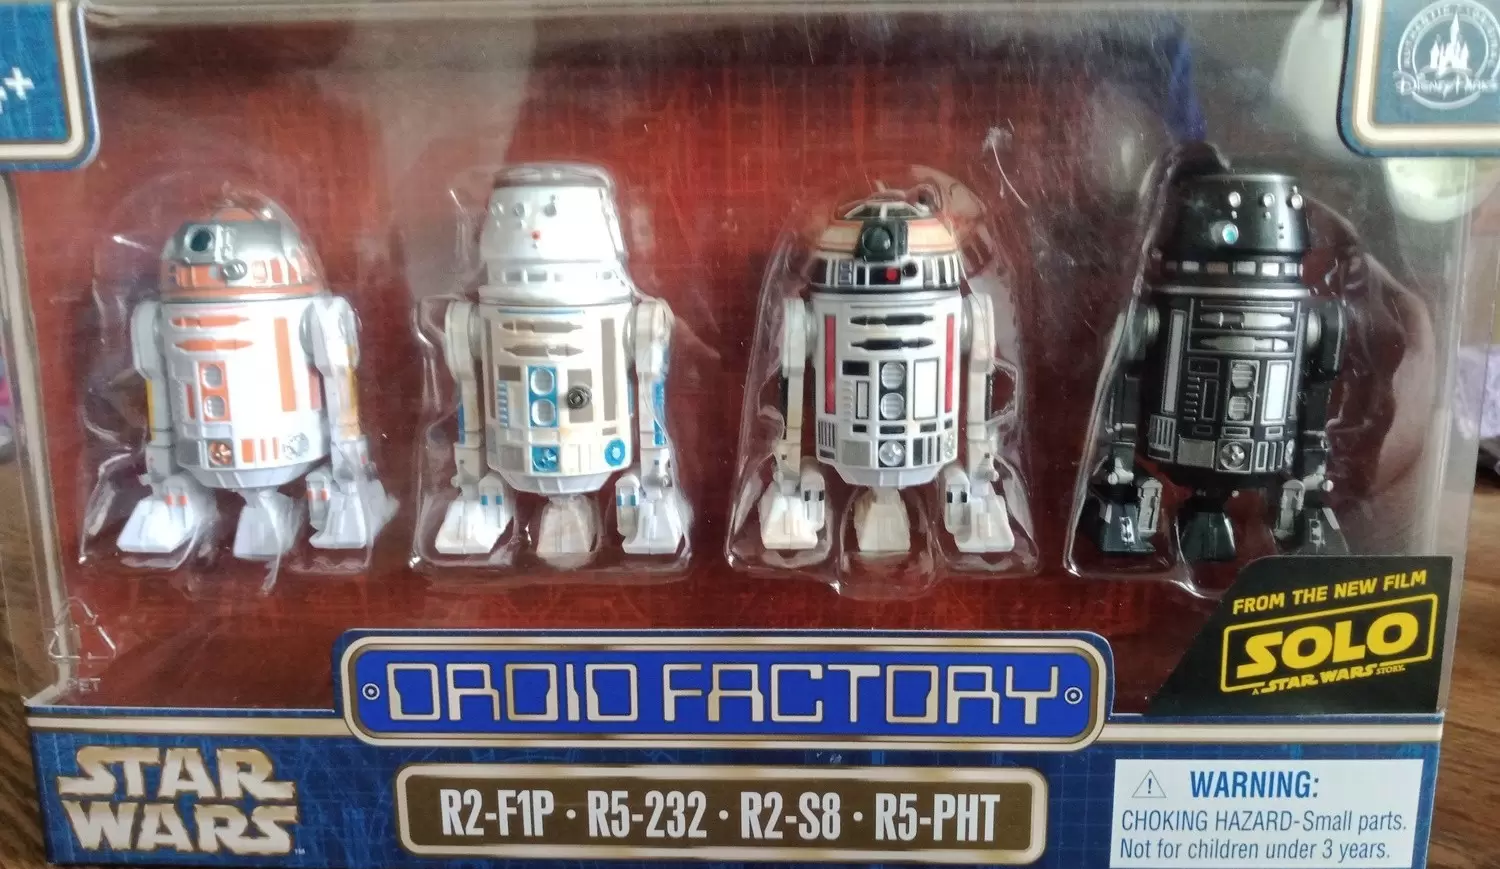 Star Tours - Droid Factory - R2-F1P/R5-232/R2-S8/R5-PHT